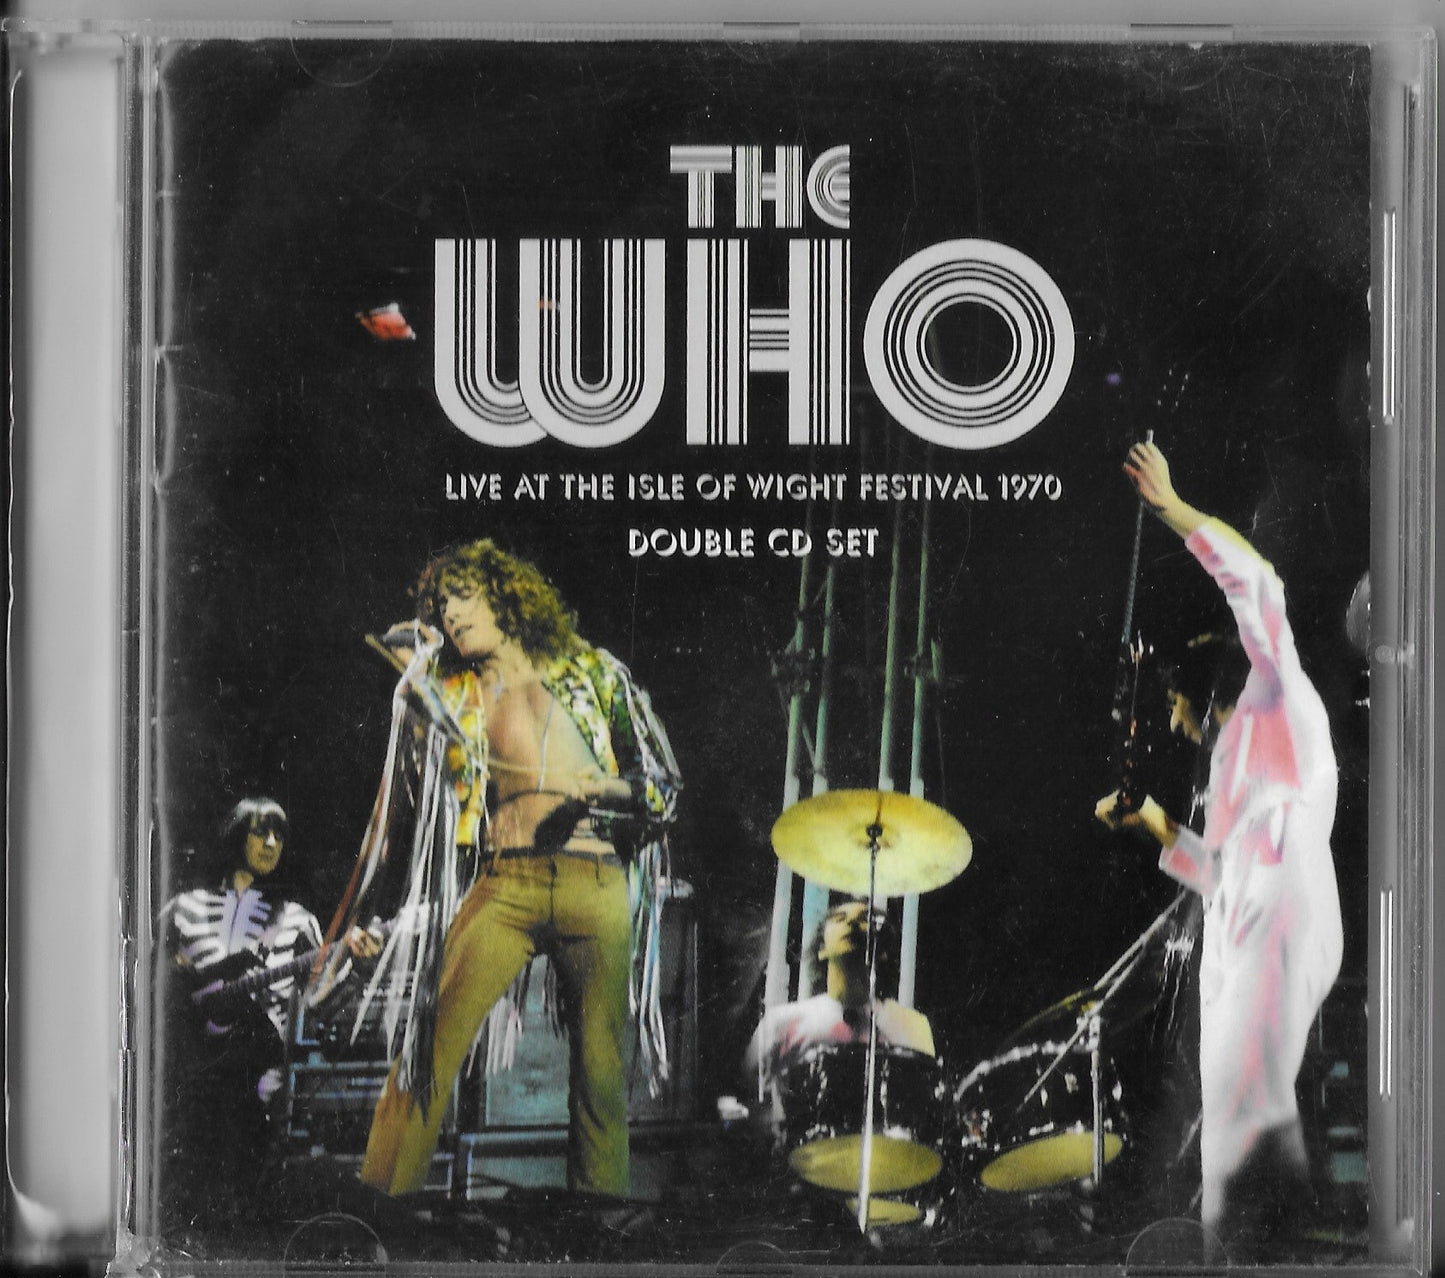 THE WHO - Live At The Isle Of Wight Festival 1970